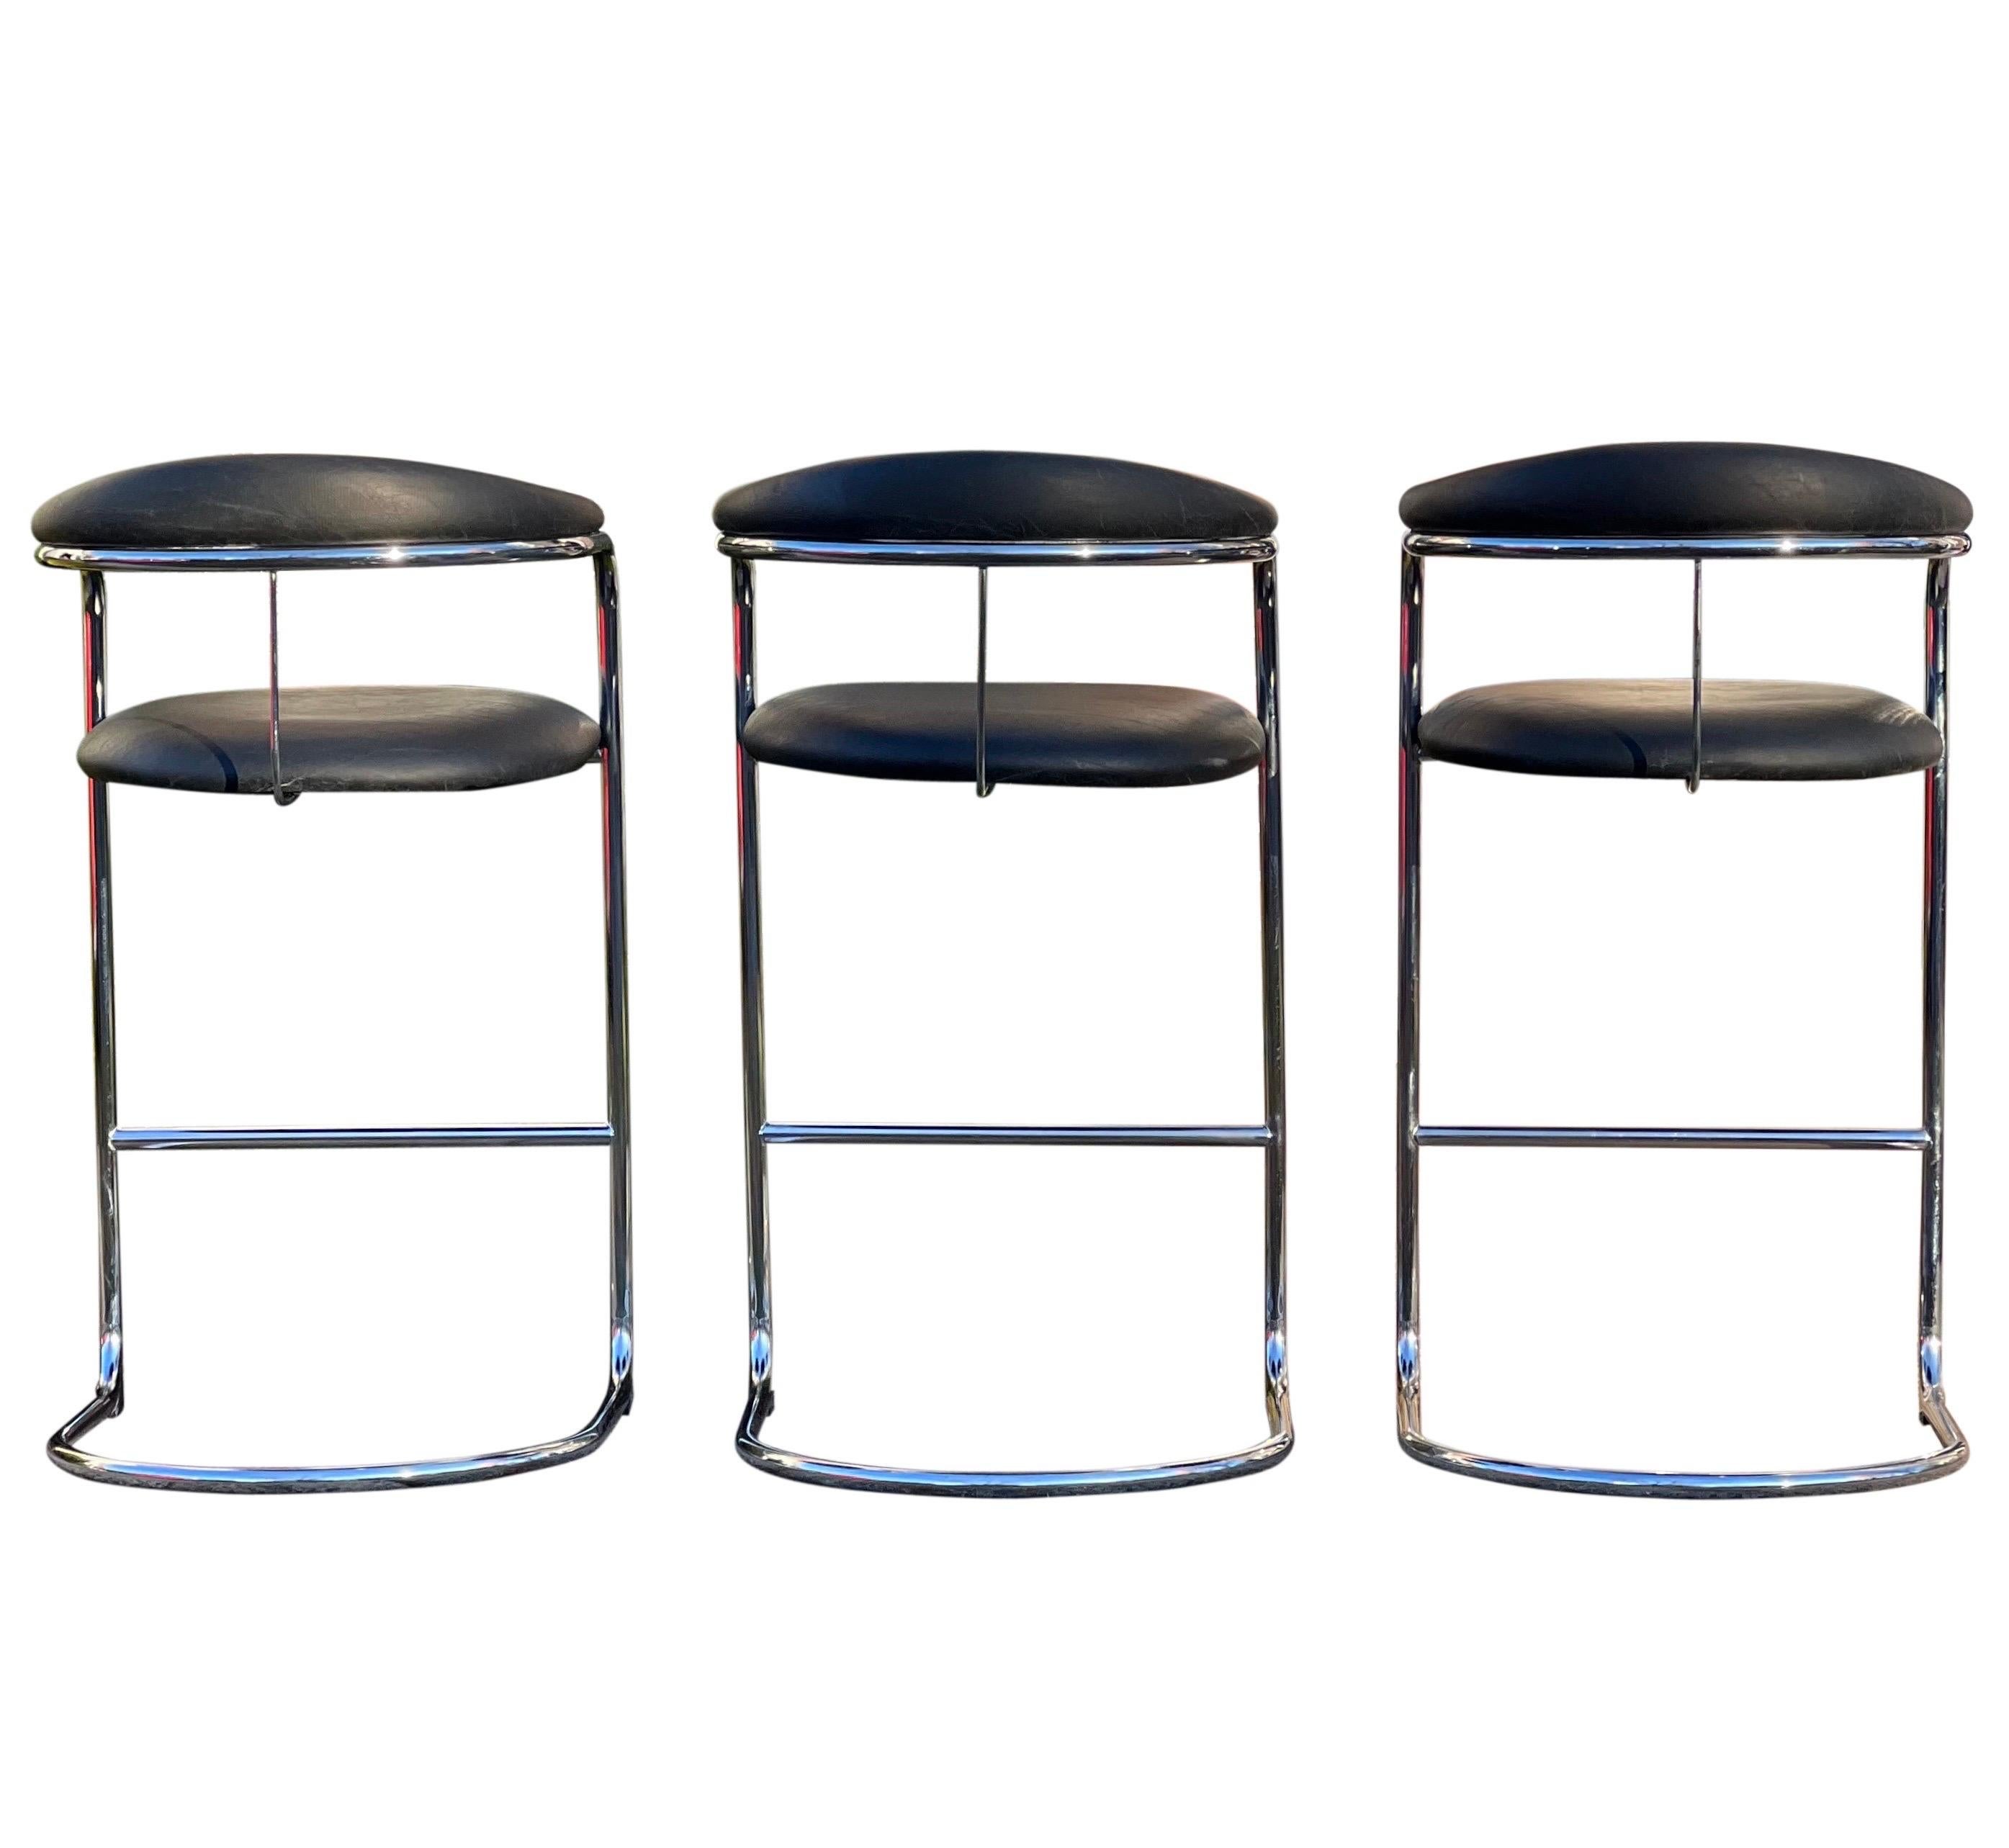 North American 1980's Anton Lorenz for Thonet Black and Chrome Cantilever Bar Stools, Set of 3 For Sale